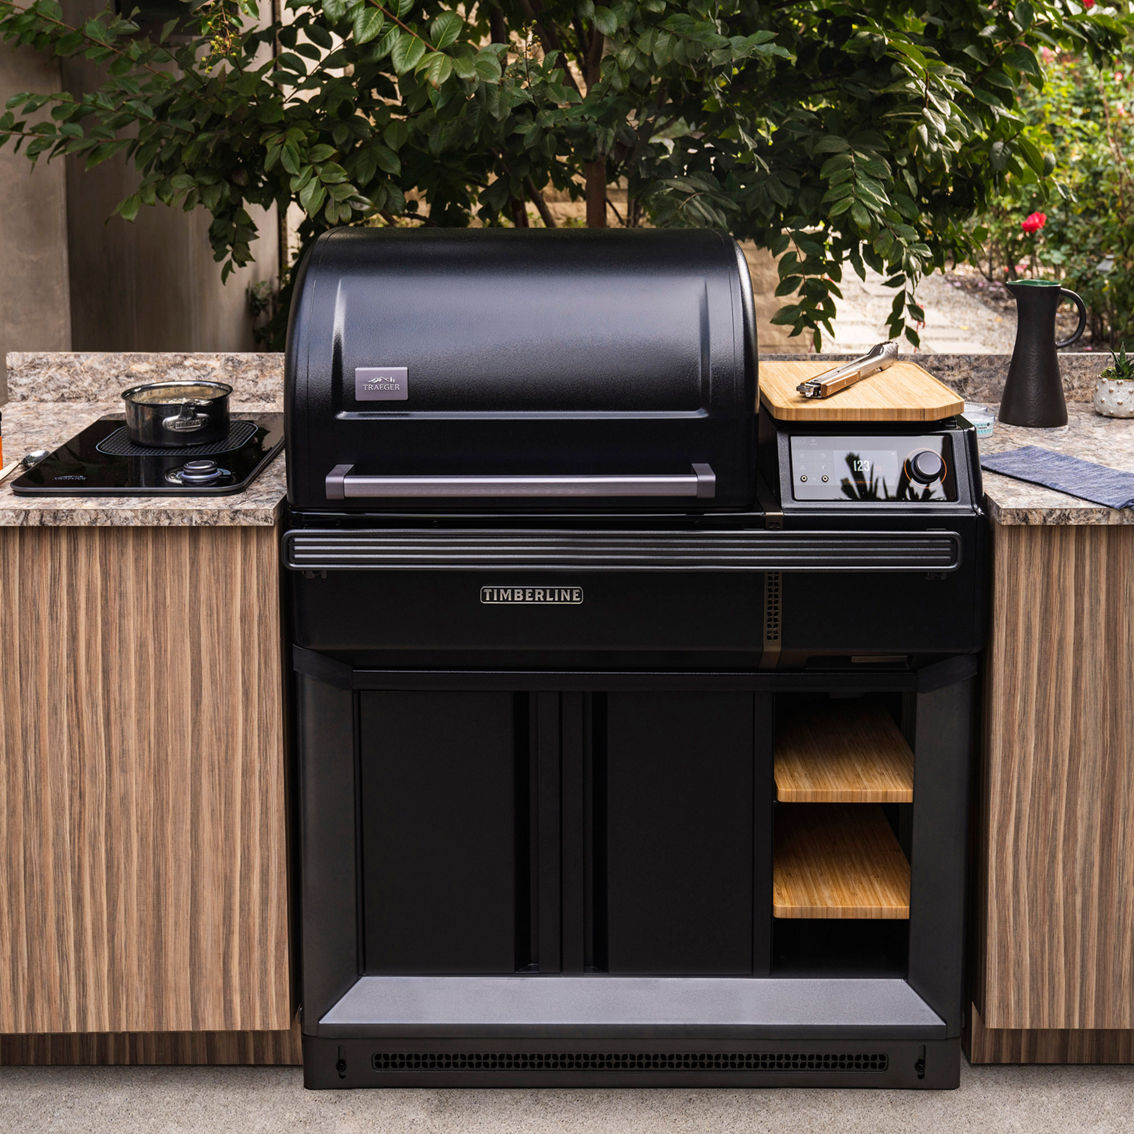 Traeger New Timberline Wood Pellet Grill - Image 5 of 7